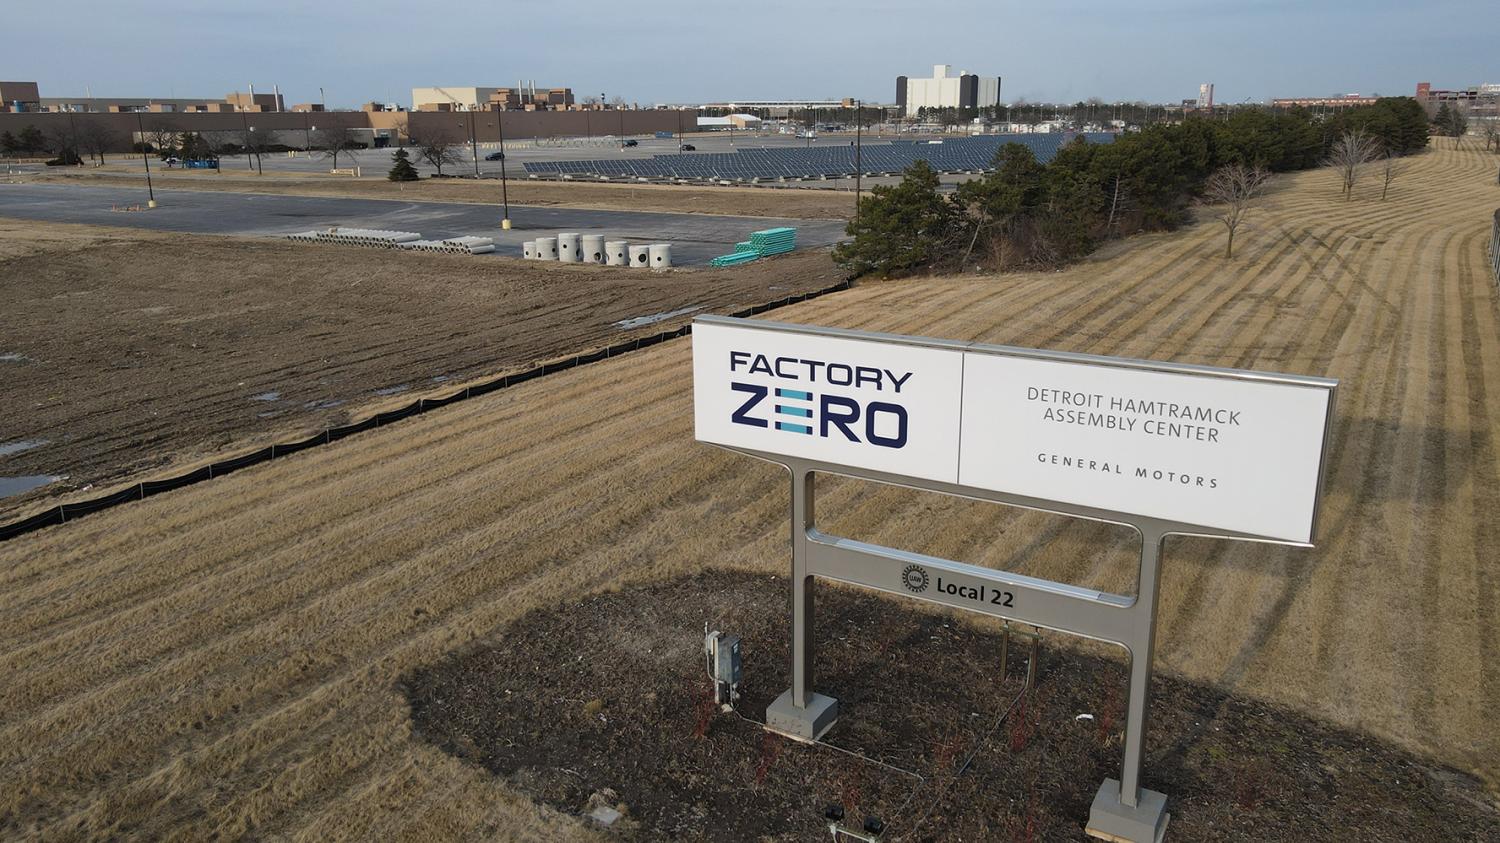 HAMTRAMCK, UNITED STATES - Mar 09, 2022: General Motor's Factory Zero assembly plant in Hamtramck Michigan, where the Hummer EV, and electric pickup trucks will be built